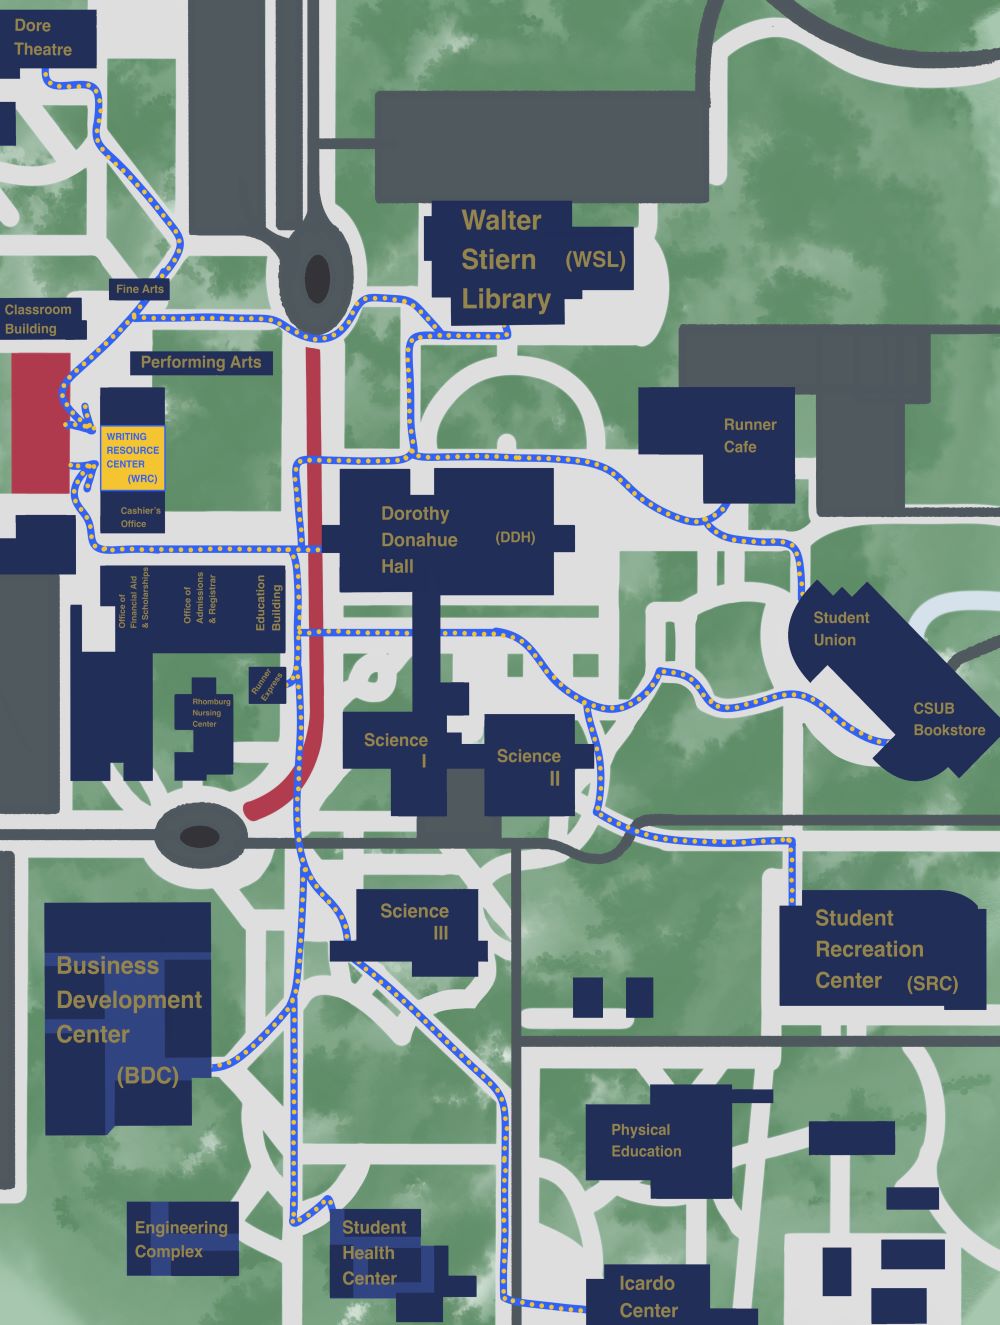 Map showing the location of the Writing Resource Center